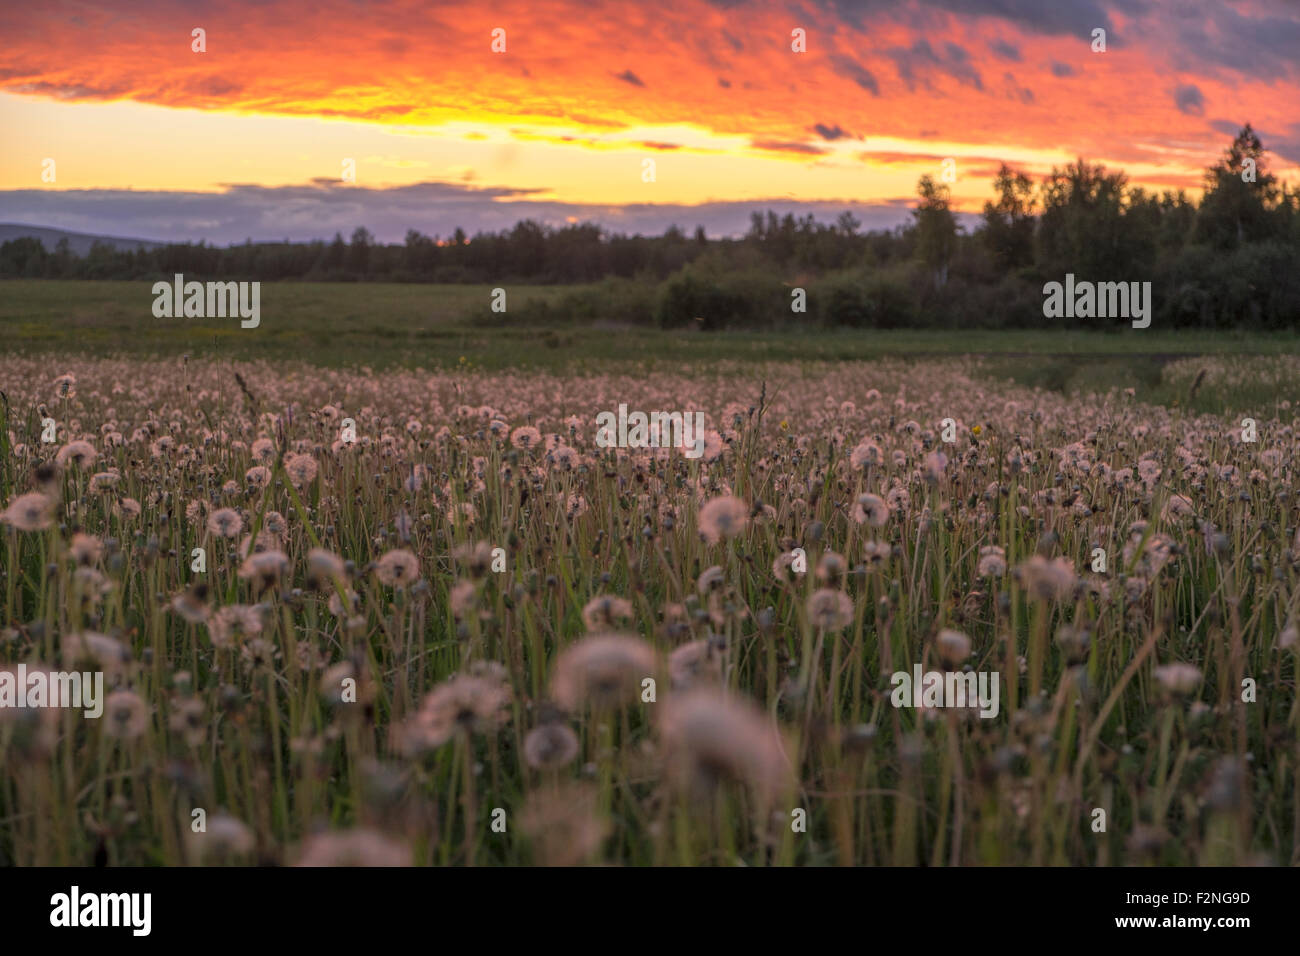 Tall weeds growing in rural field Stock Photo